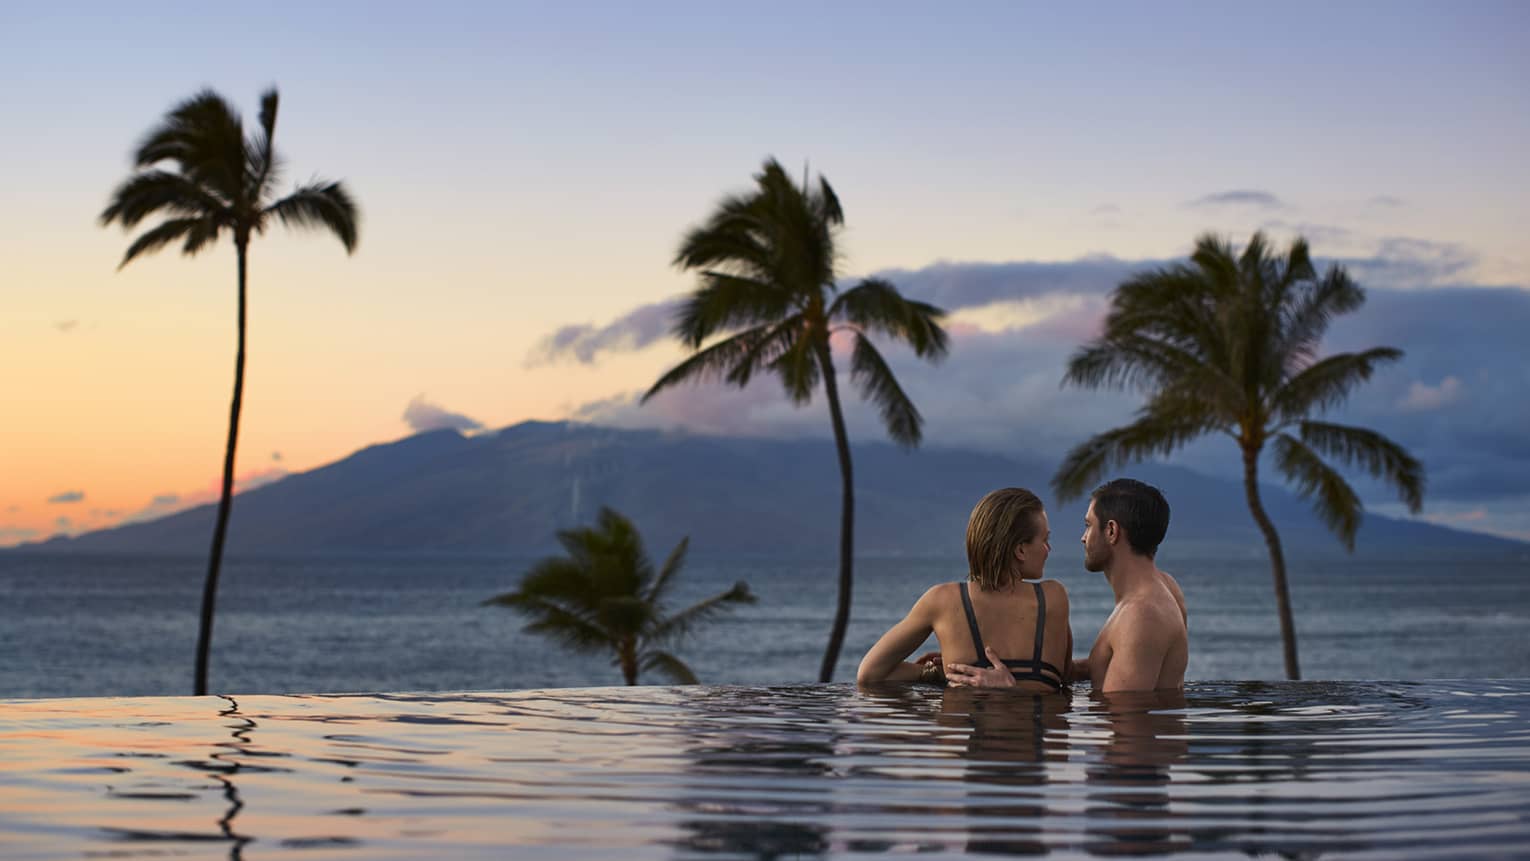 Man rests hand on woman's shoulder in infinity swimming pool, looking out at ocean, mountain and sunset